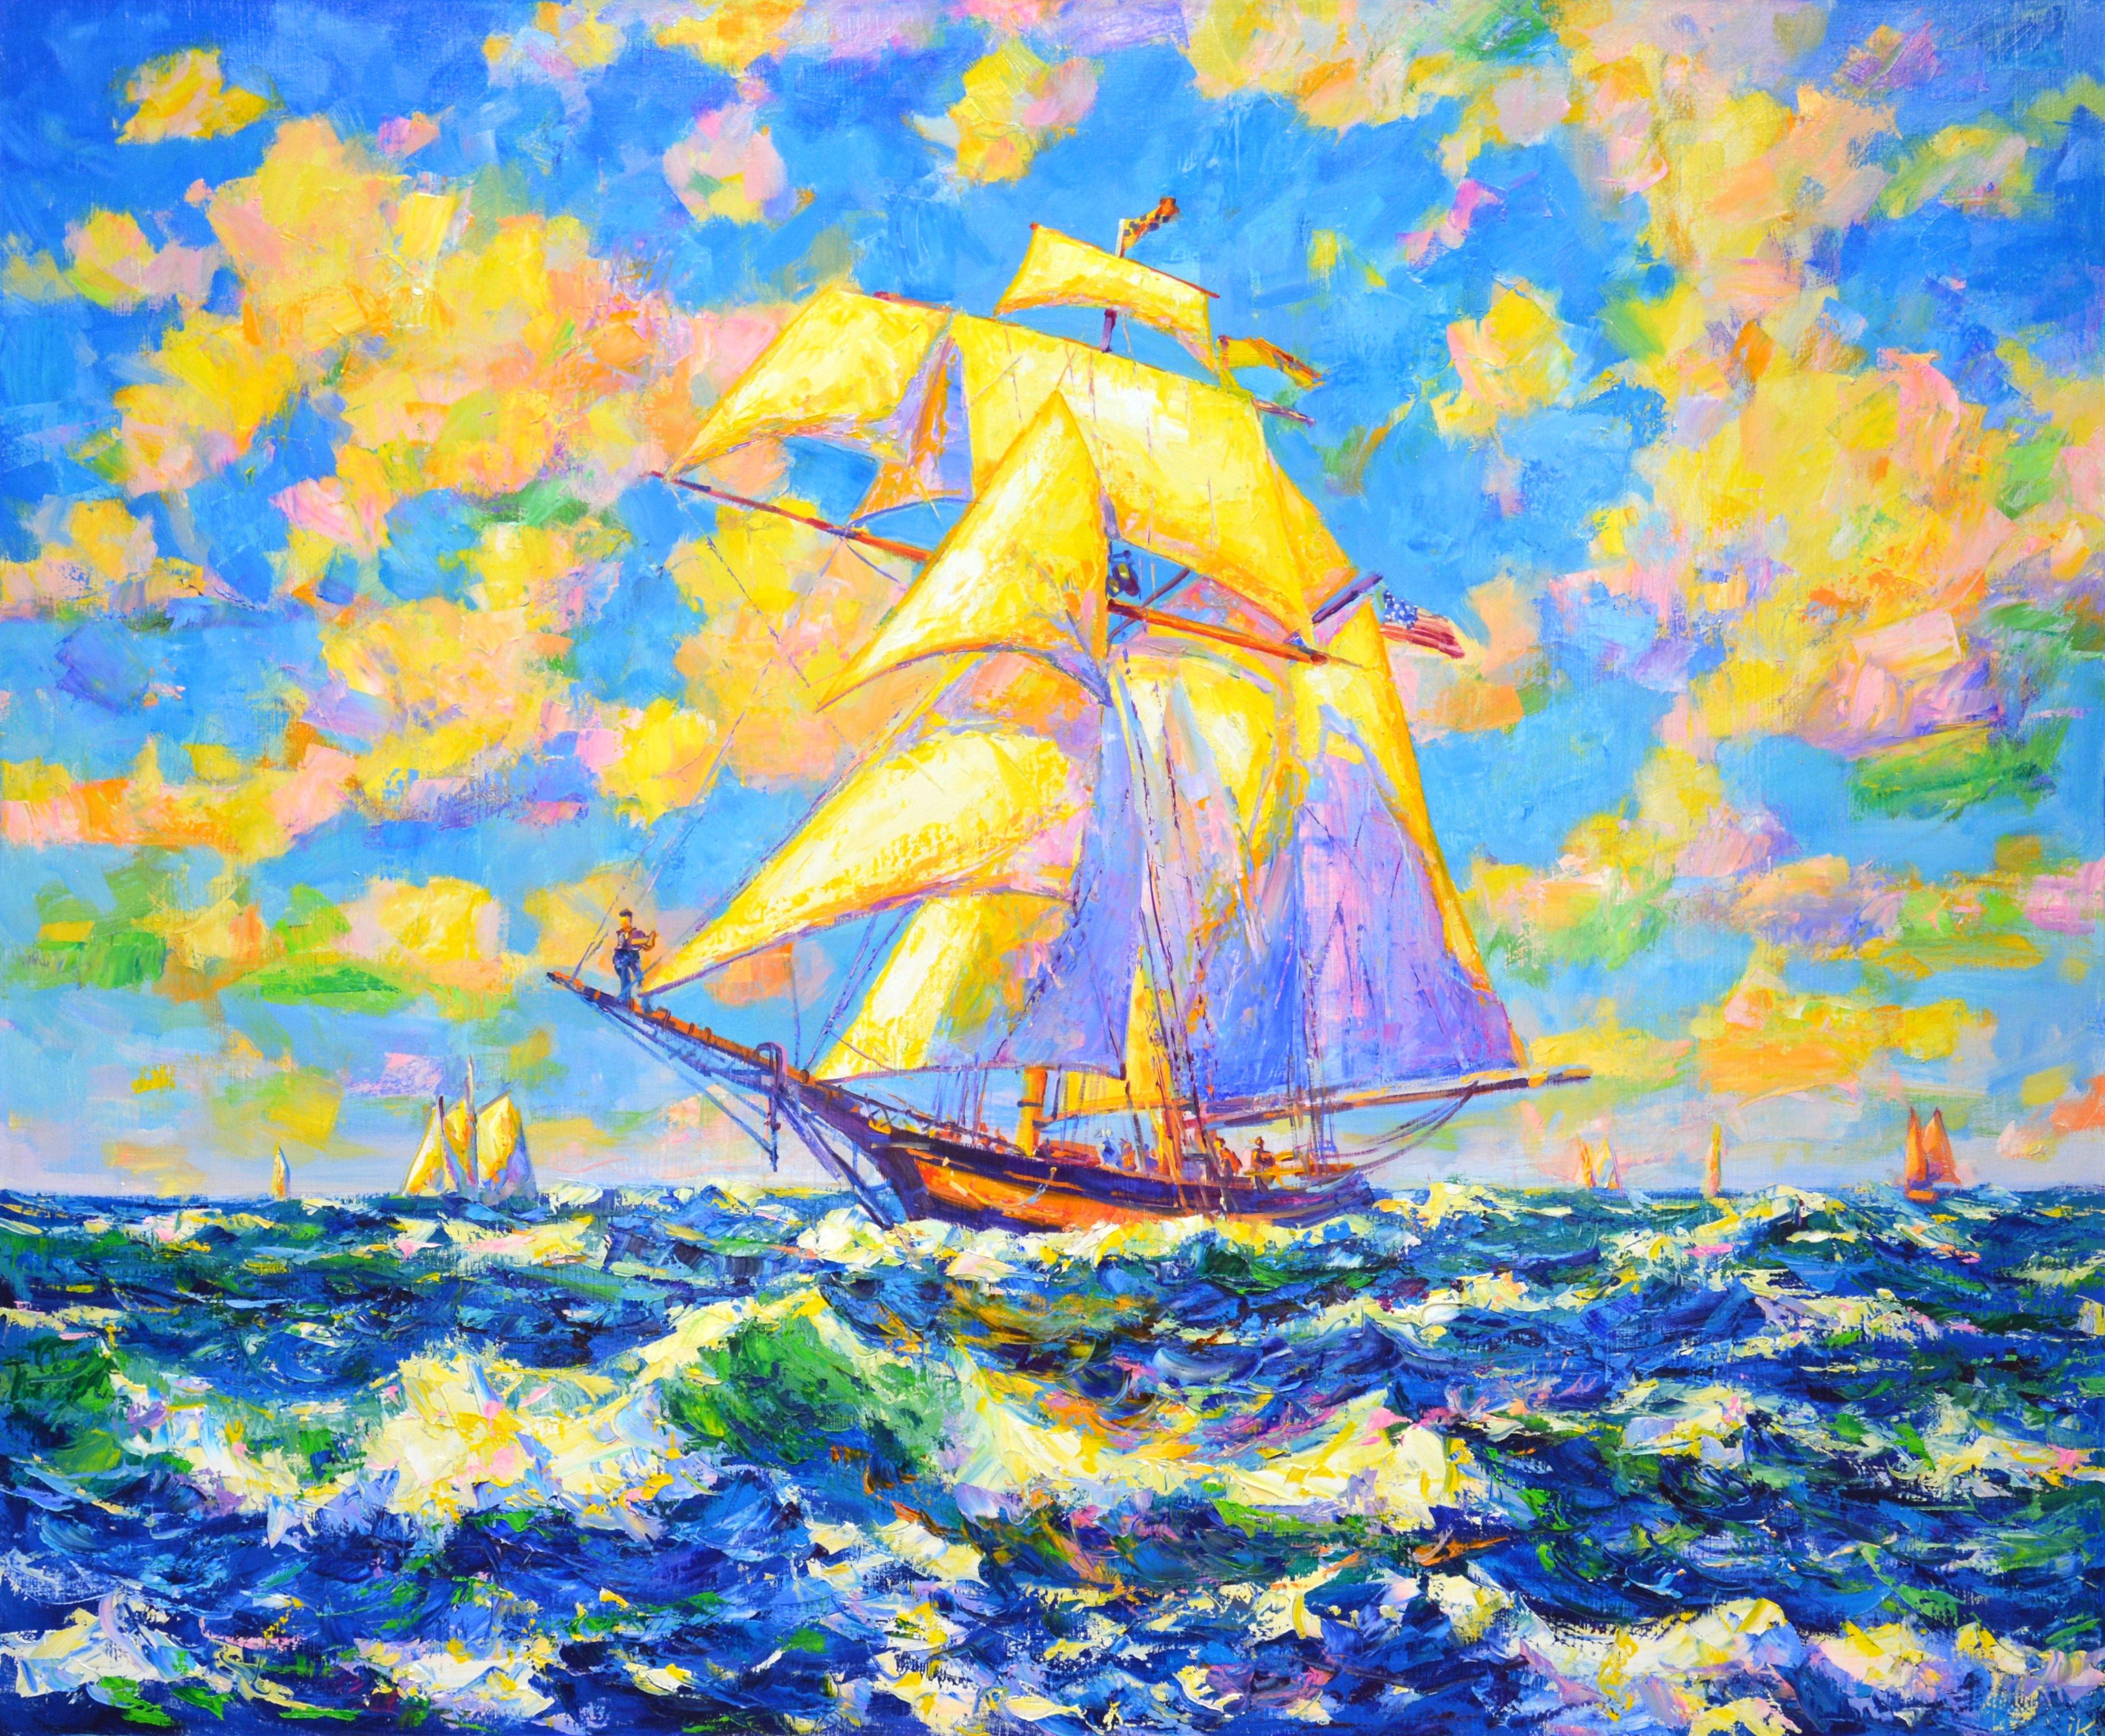 Dream ship. The sailboat sails in the midday sun, the crew keeps the sails. Golden light reflects off the canvas of the sail and passing clouds. The work of the palette knife emphasizes the changing water and the action of the scene. Impressionism.